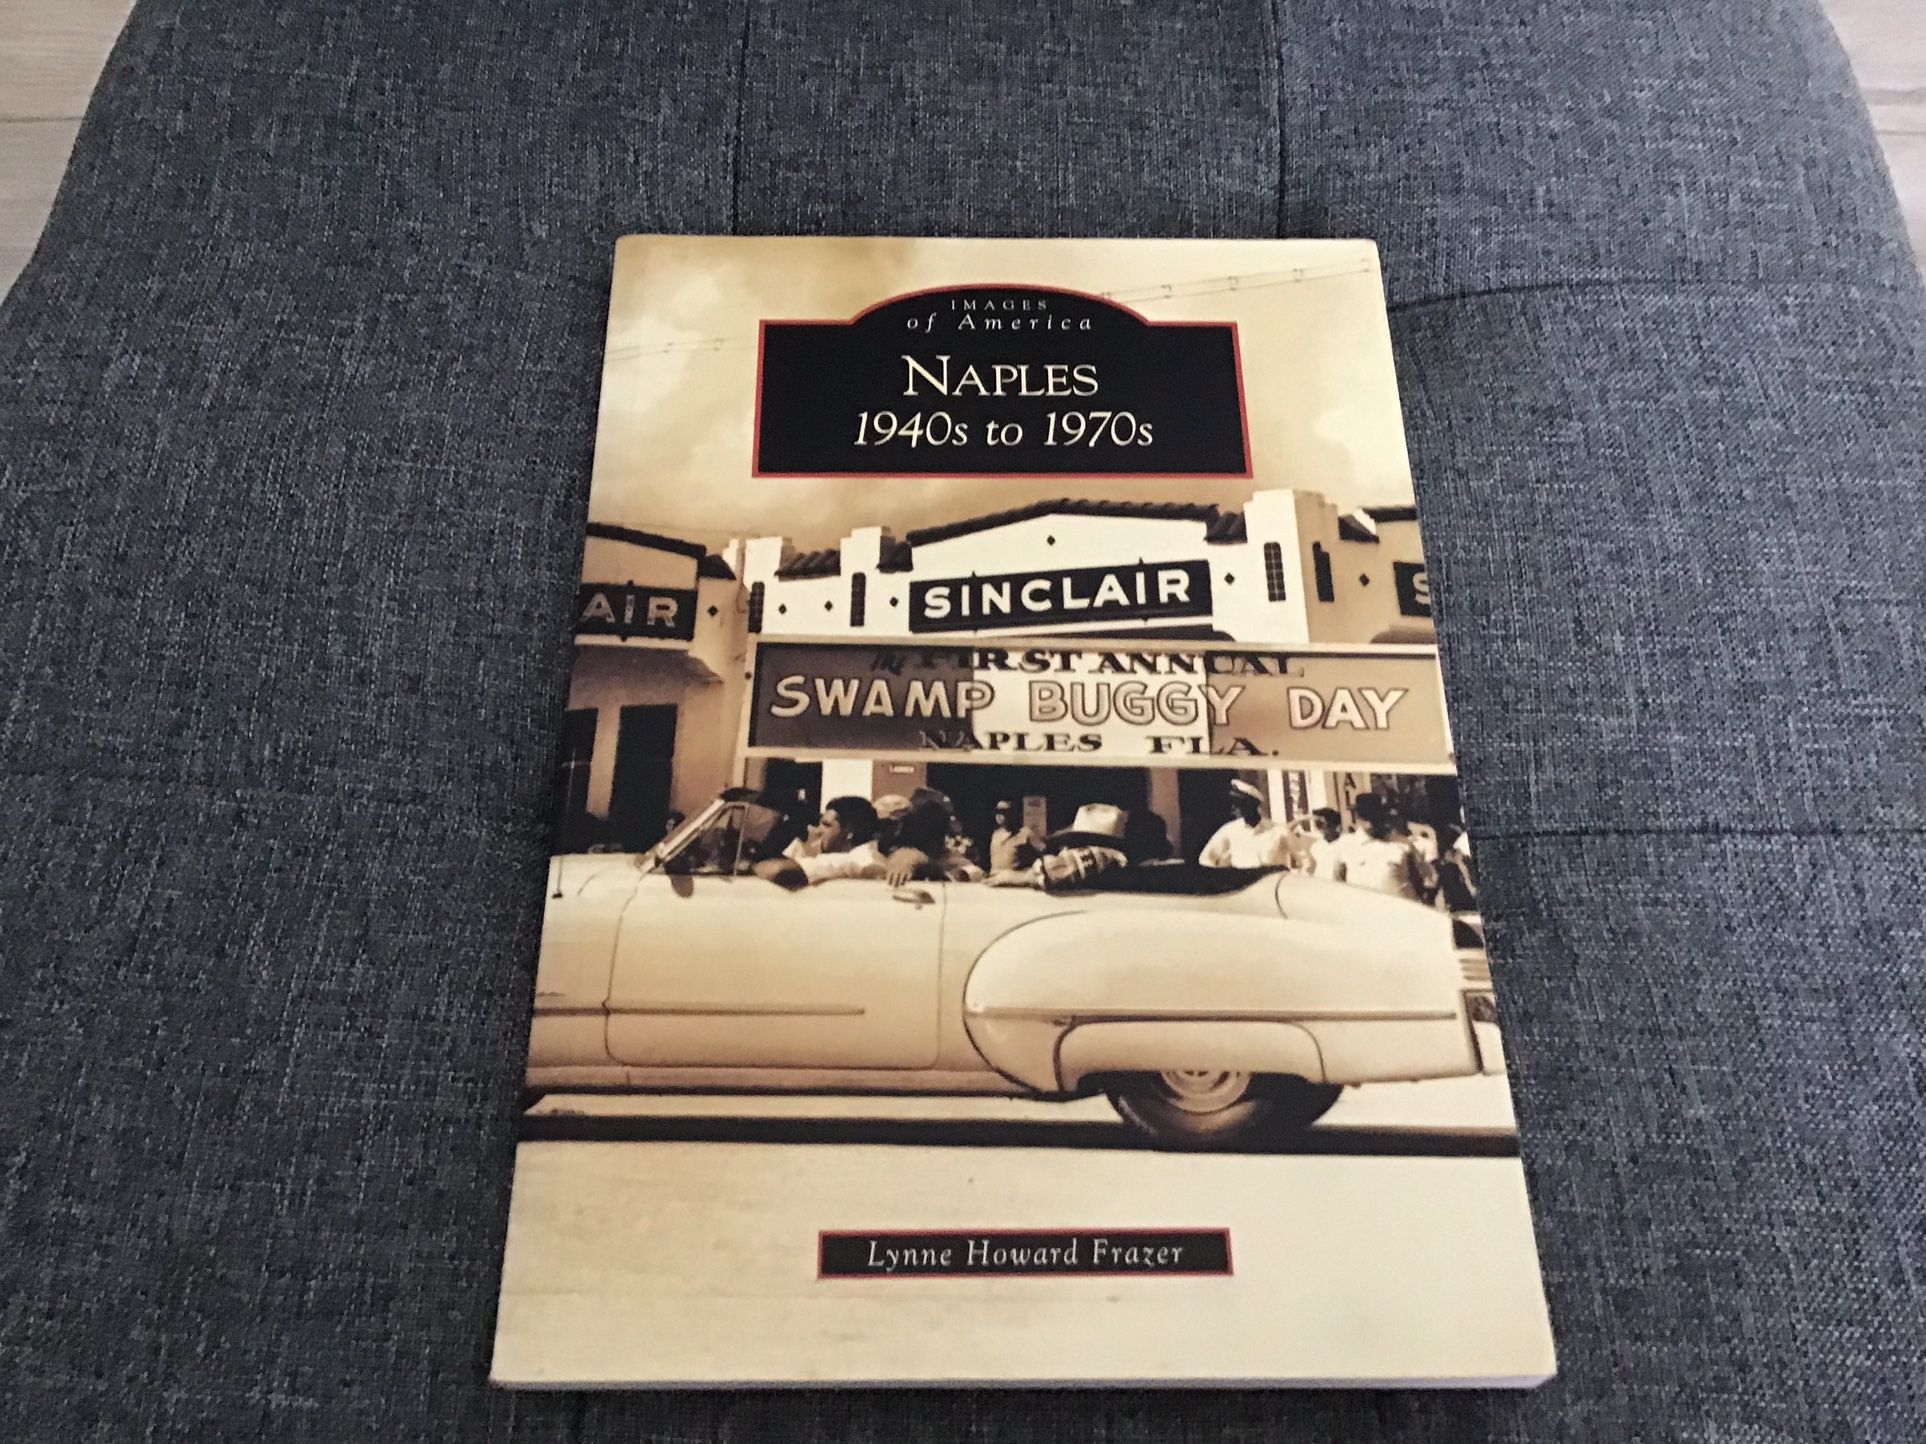 NAPLES 1940s to 1970s~Images of America Book by Lynne Howard Frazer~128 pages~Excellent condition 